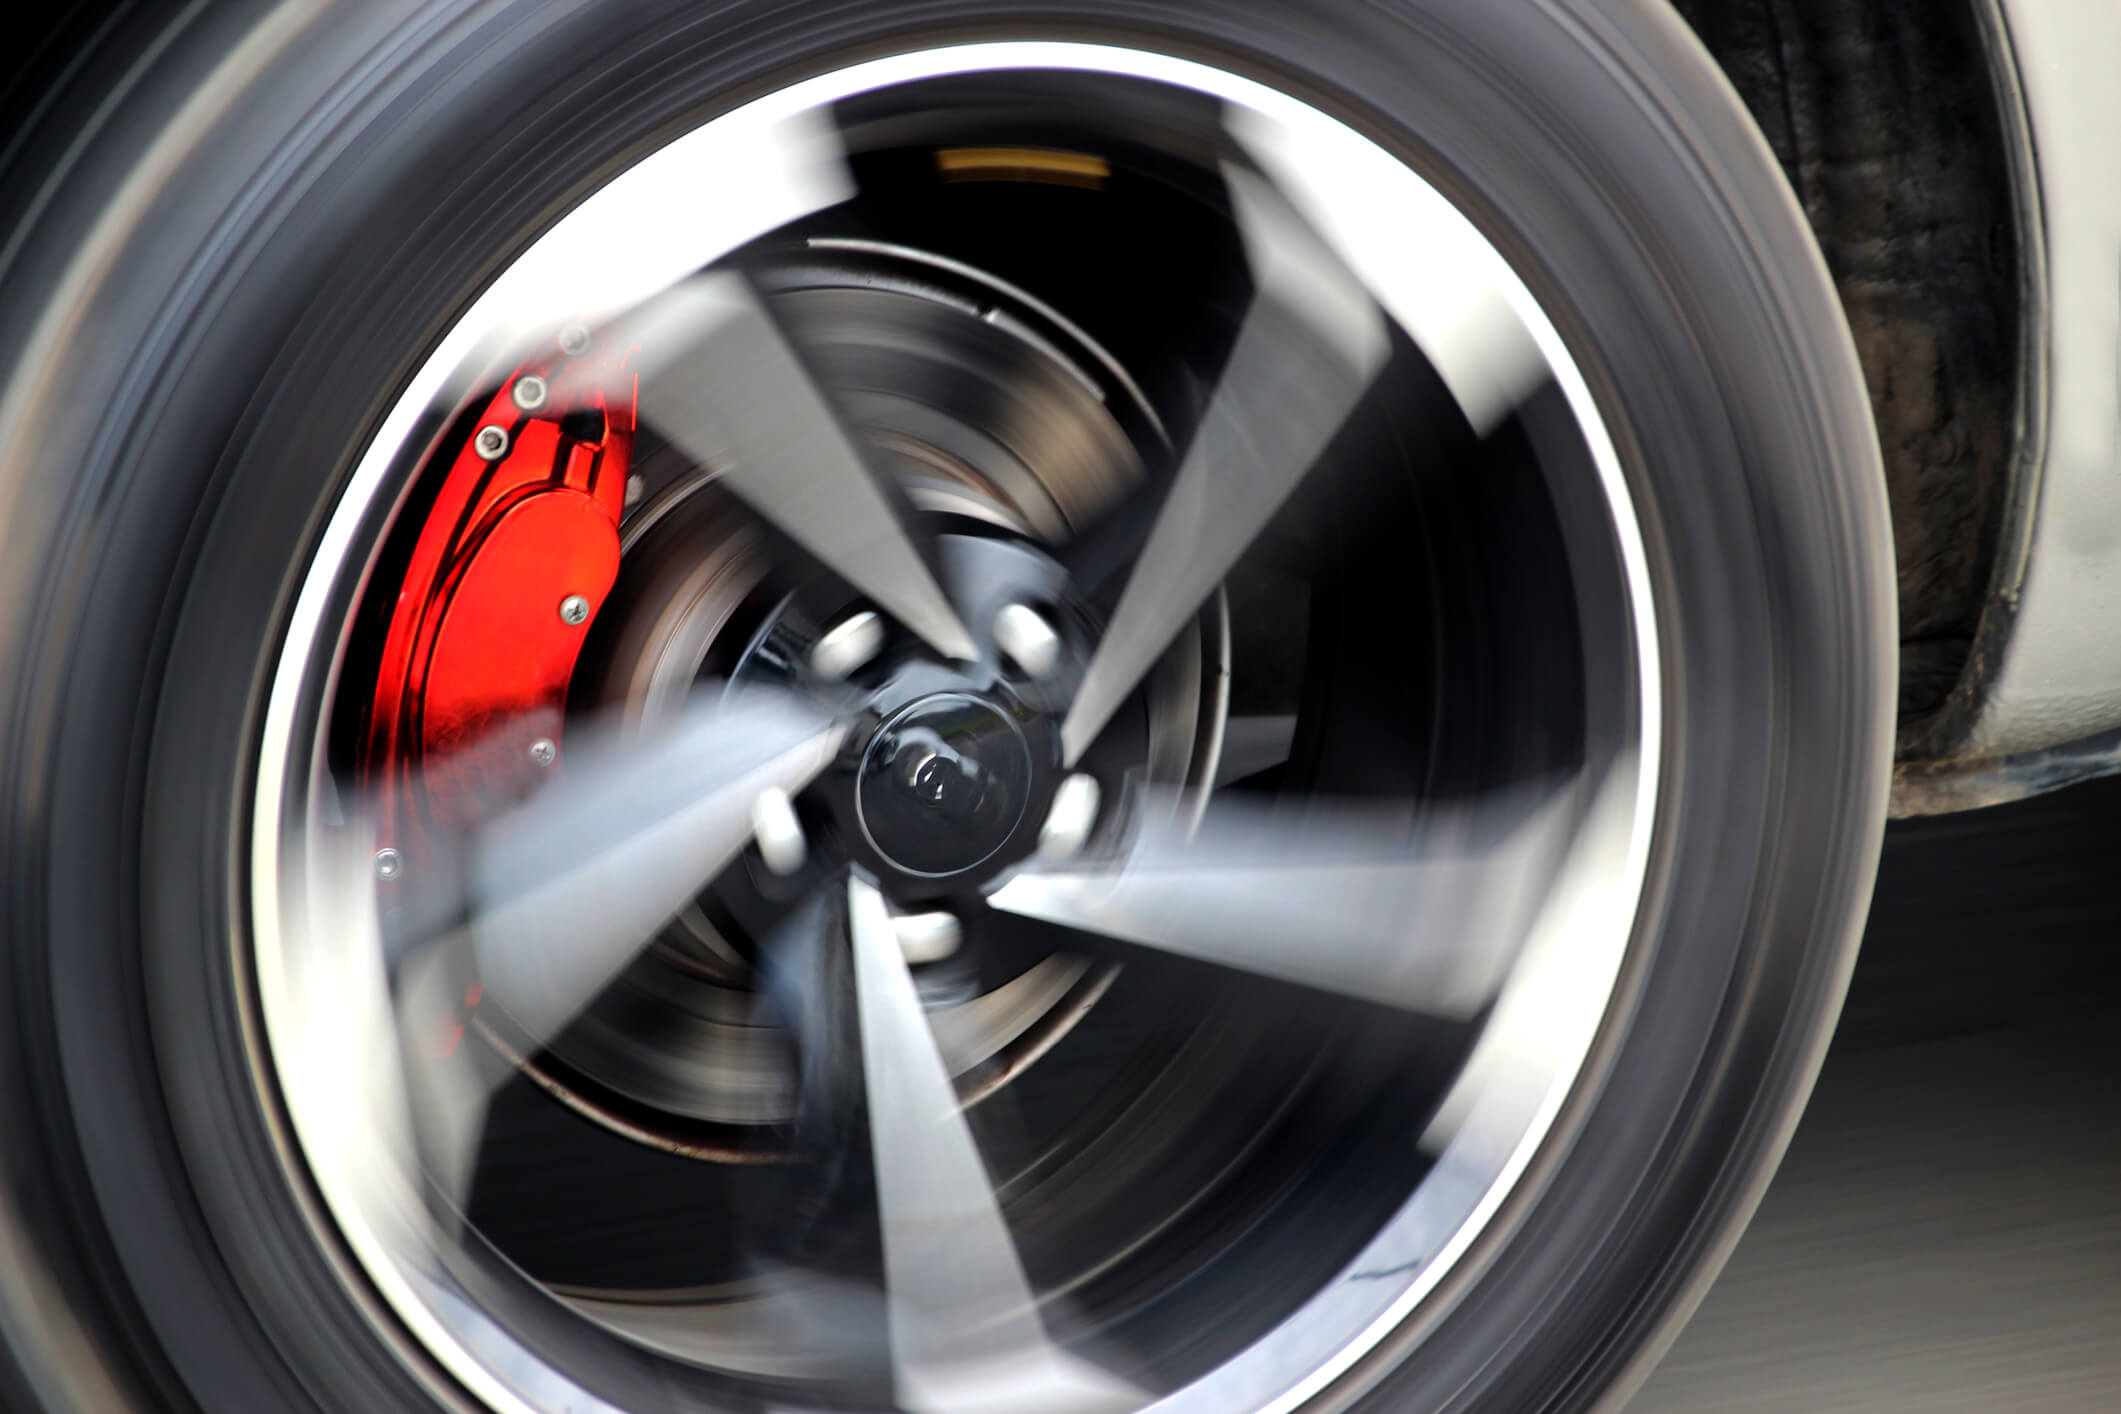 Factors influencing your safety during braking